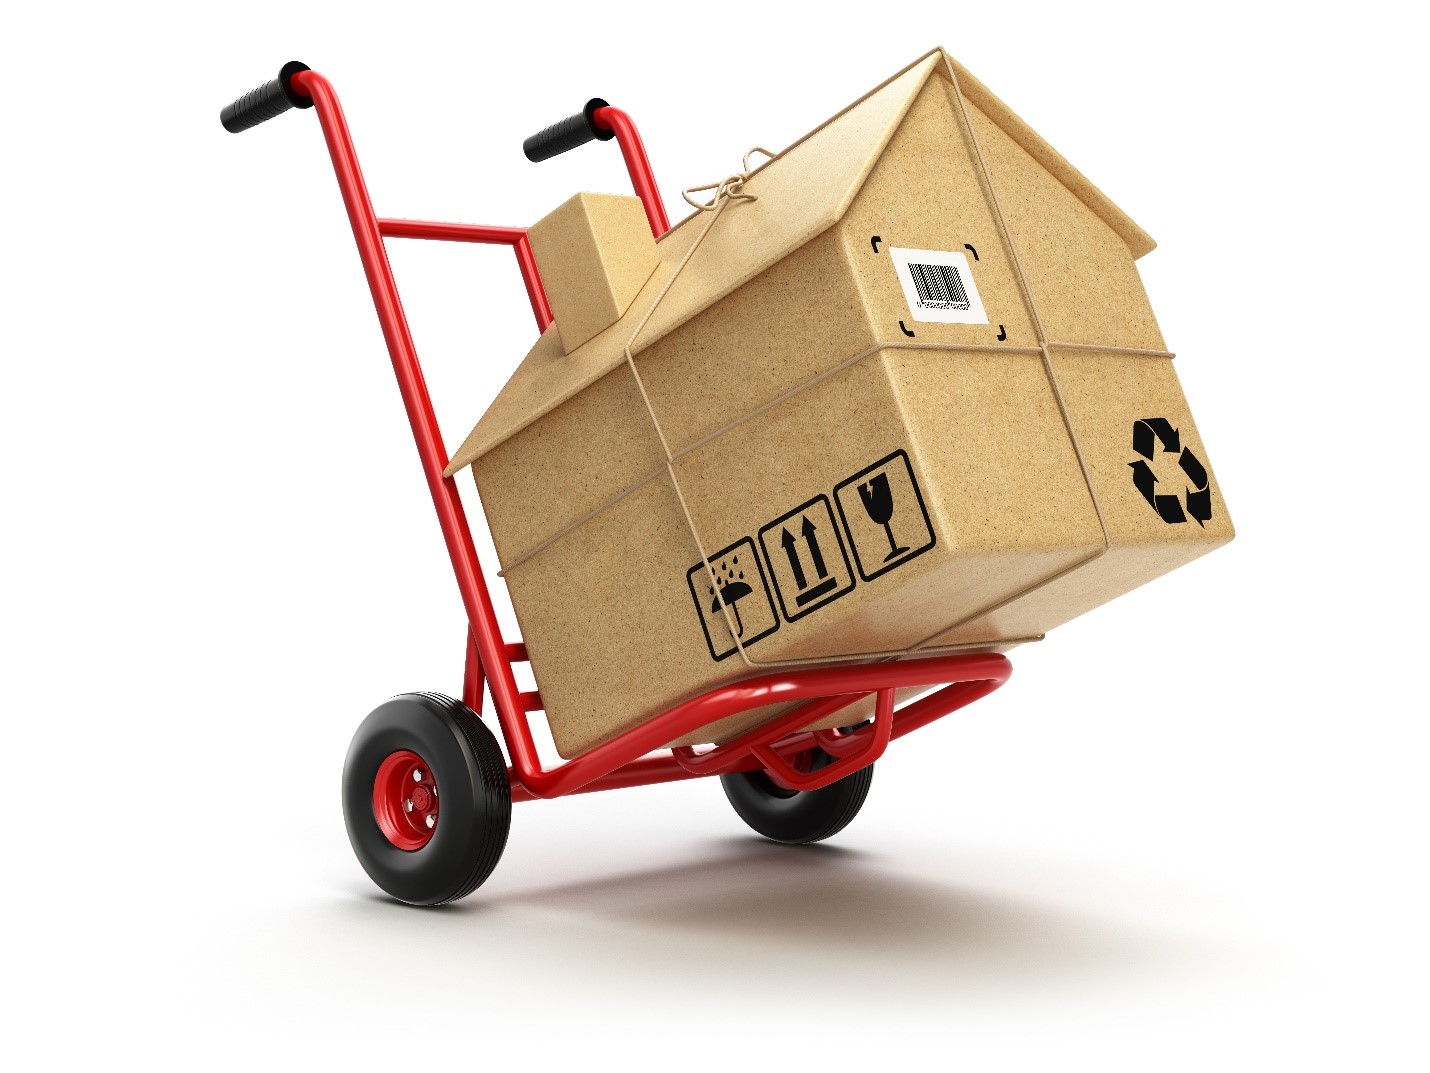 Choosing a Reliable Moving Company: A Look into Colonial Van Lines